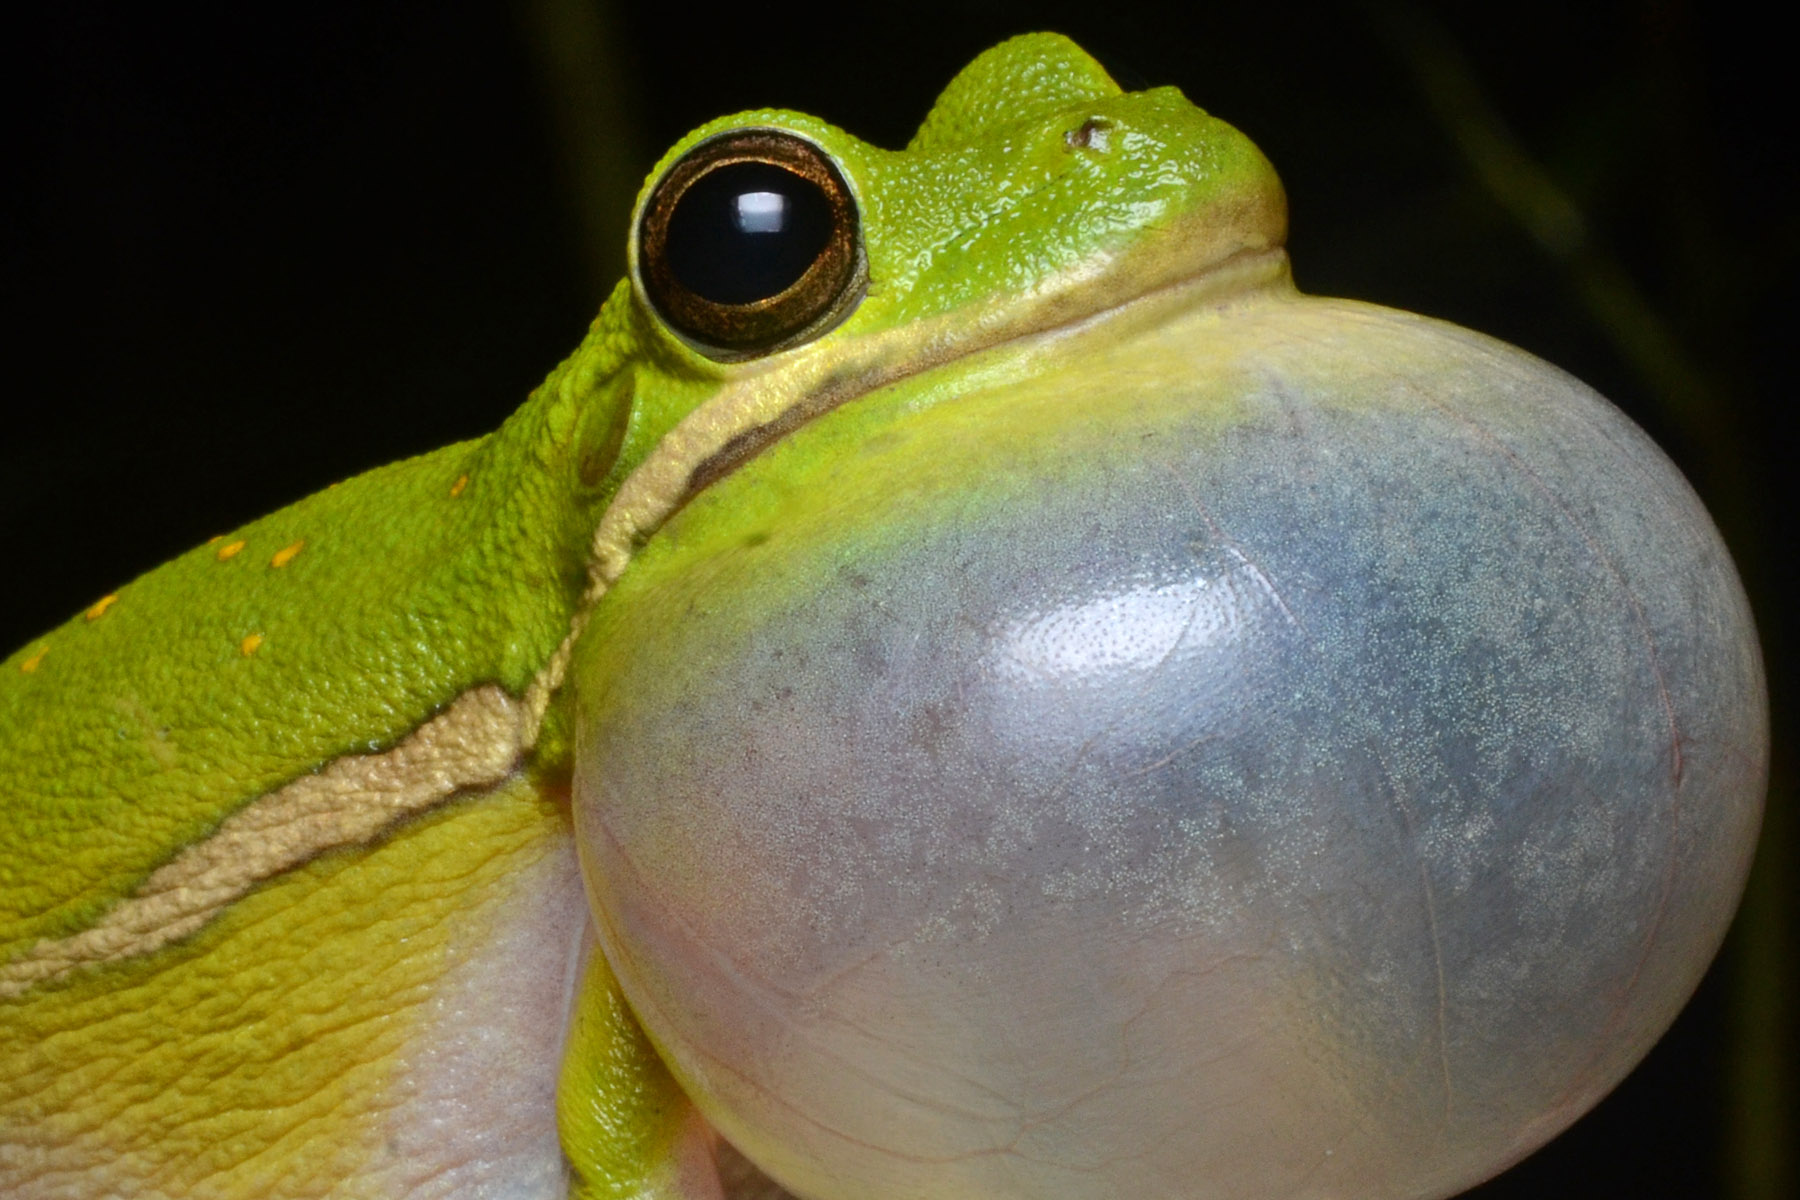 How Do Frogs Make Sound and Hear It? - The Infinite Spider